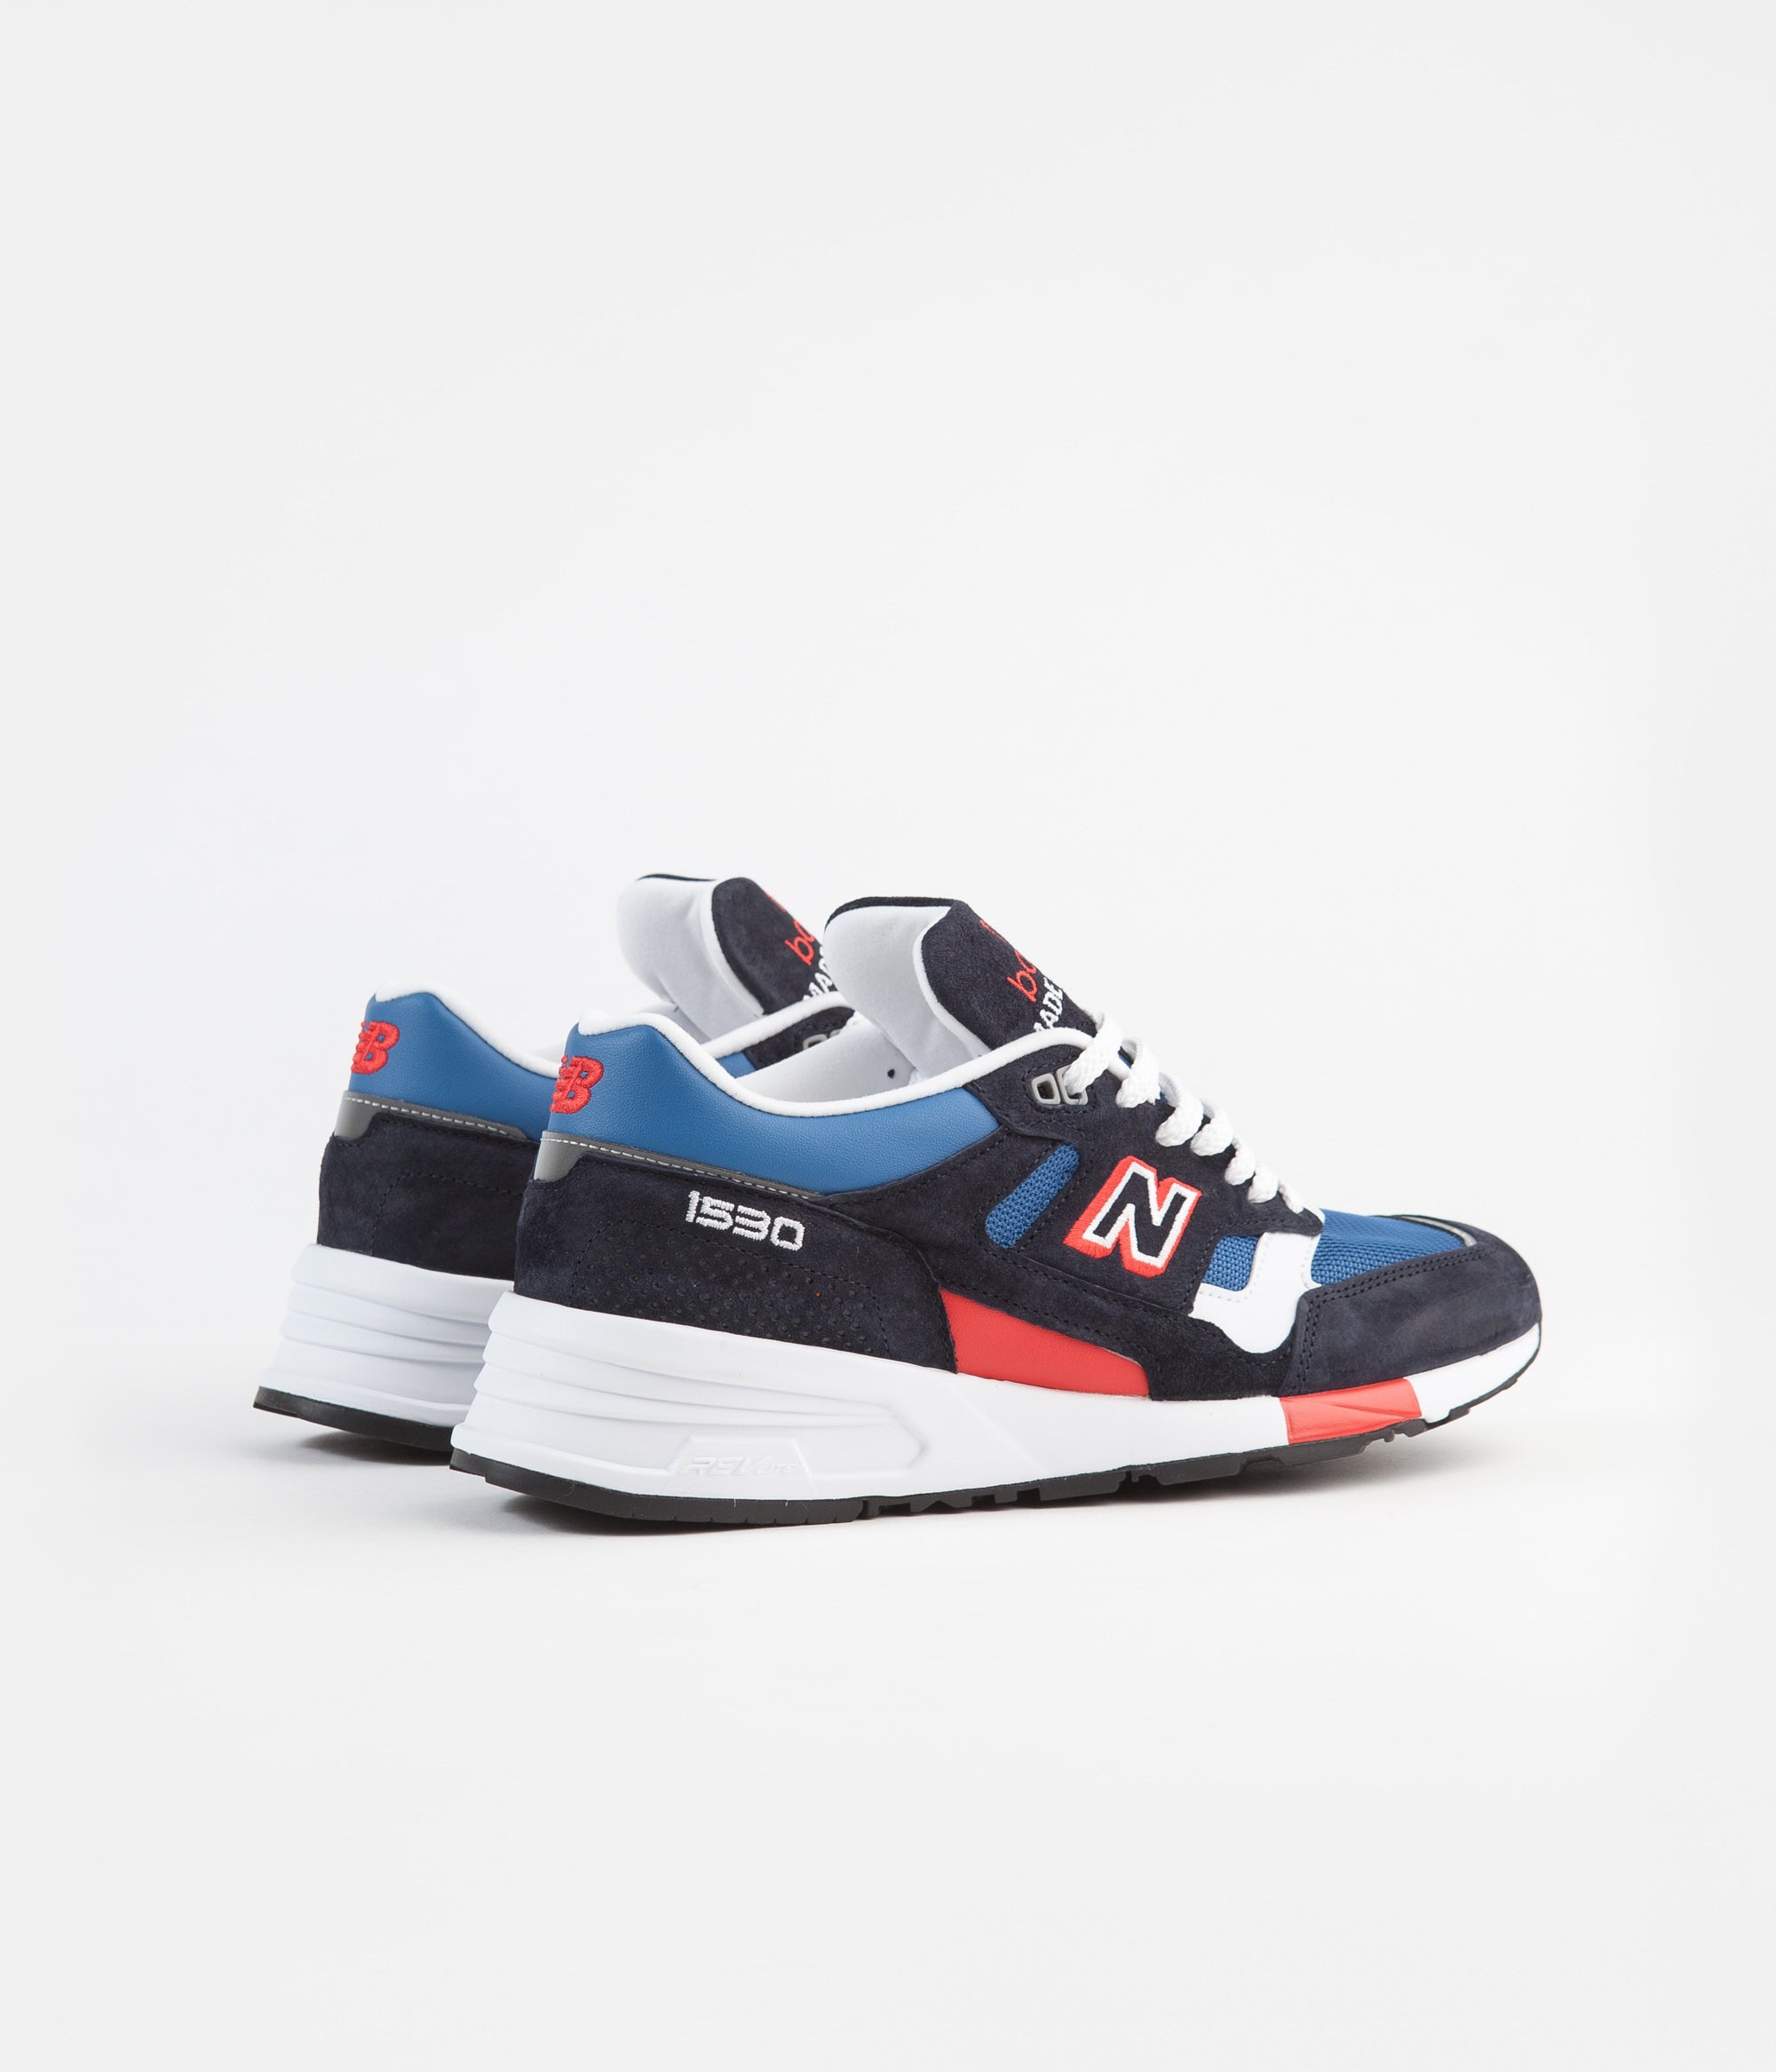 new balance made in england 153